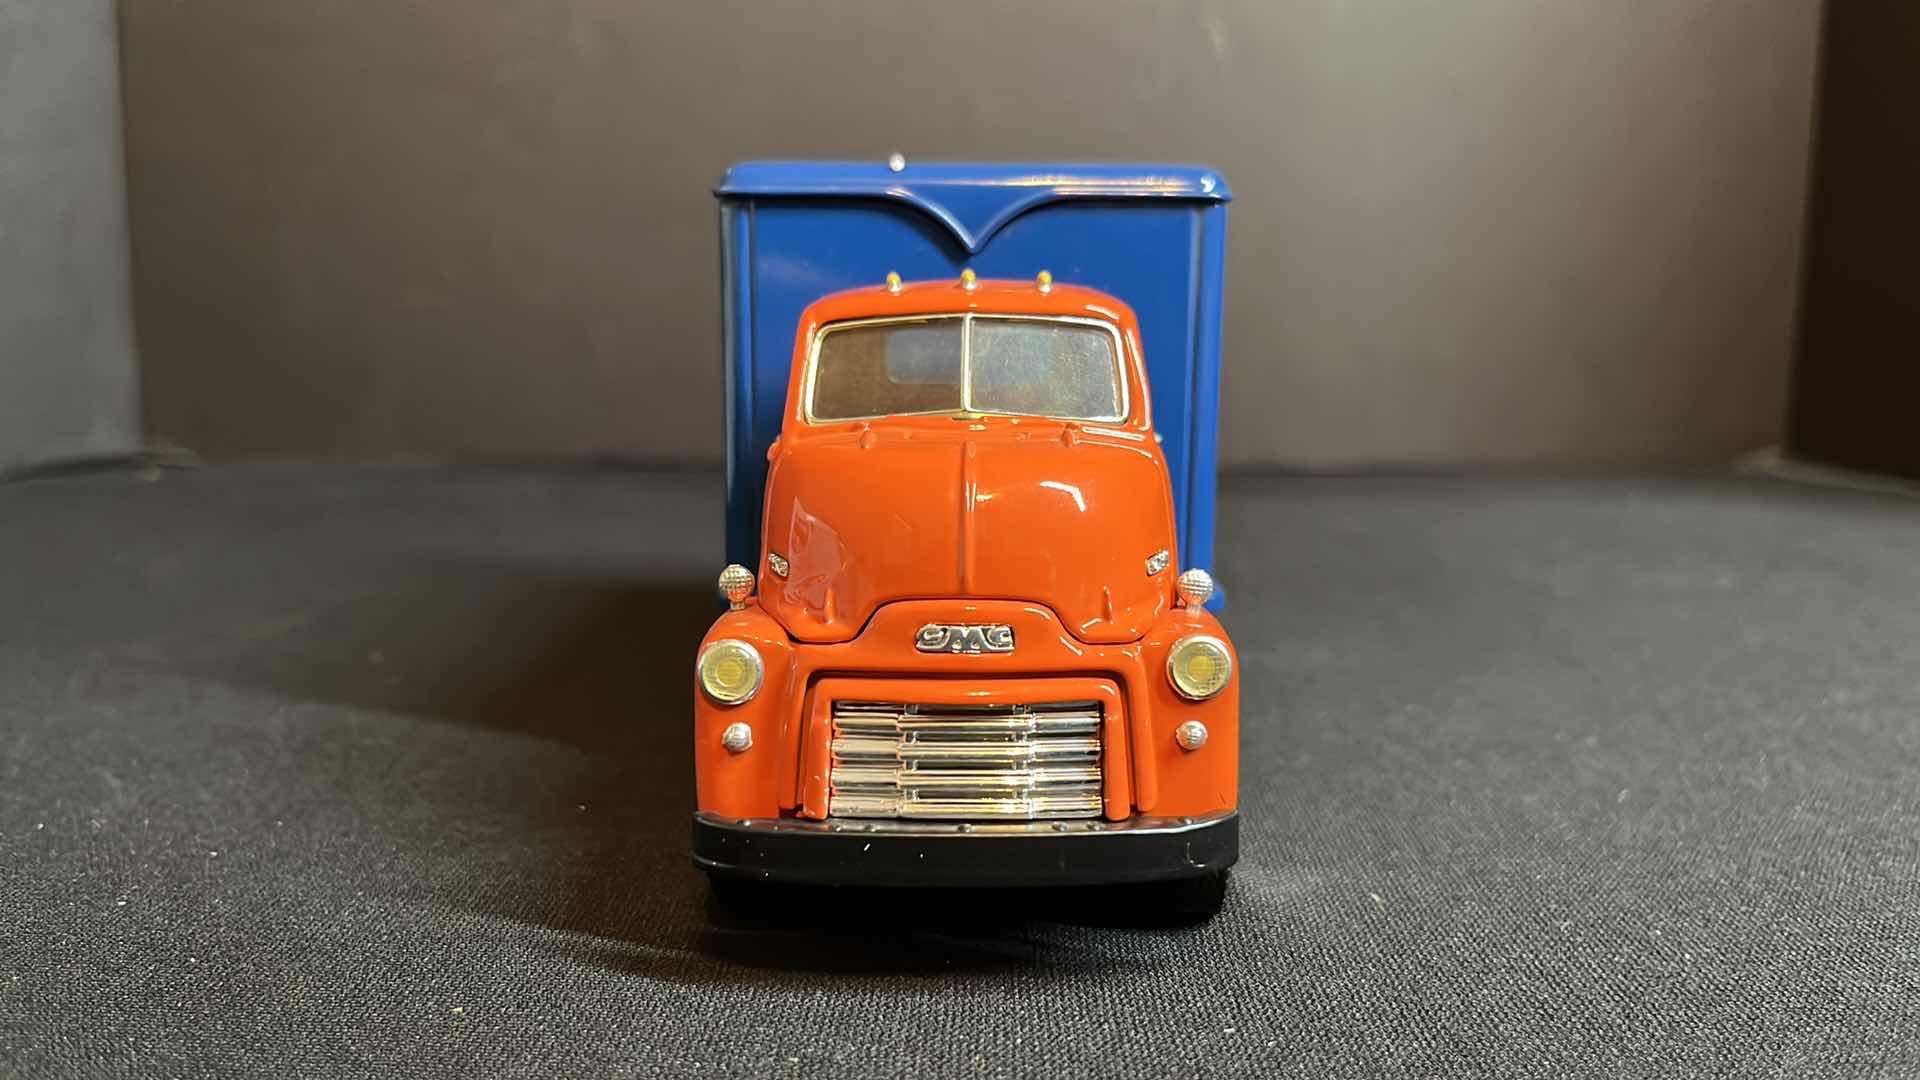 Photo 3 of NIB FIRST GEAR INC EASTWOOD AUTOMOBILIA TRANSPORTATION COLLECTABLES LIONEL ELECTRIC TRAINS DIE-CAST METAL 1/34 SCALE 1952 GMC C.O.E., 1992 (STOCK #19-0108)